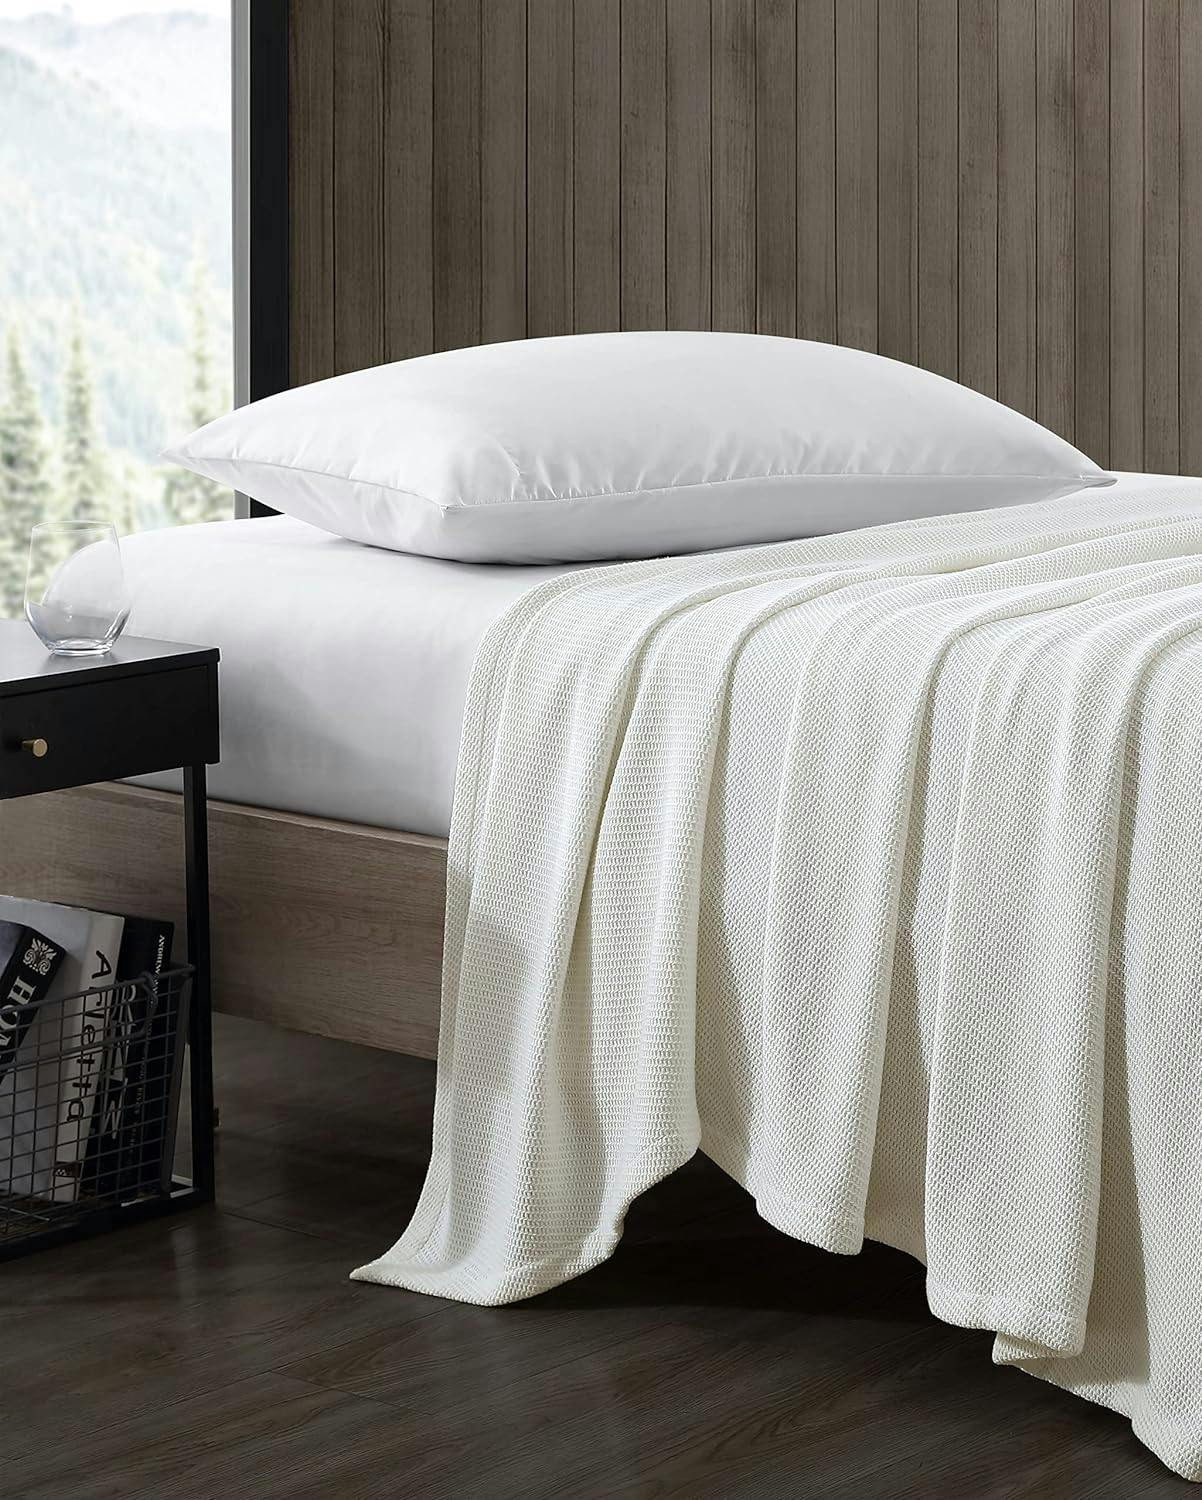 Ultra-Soft Cotton Twill Full/Queen Blanket in Textured White